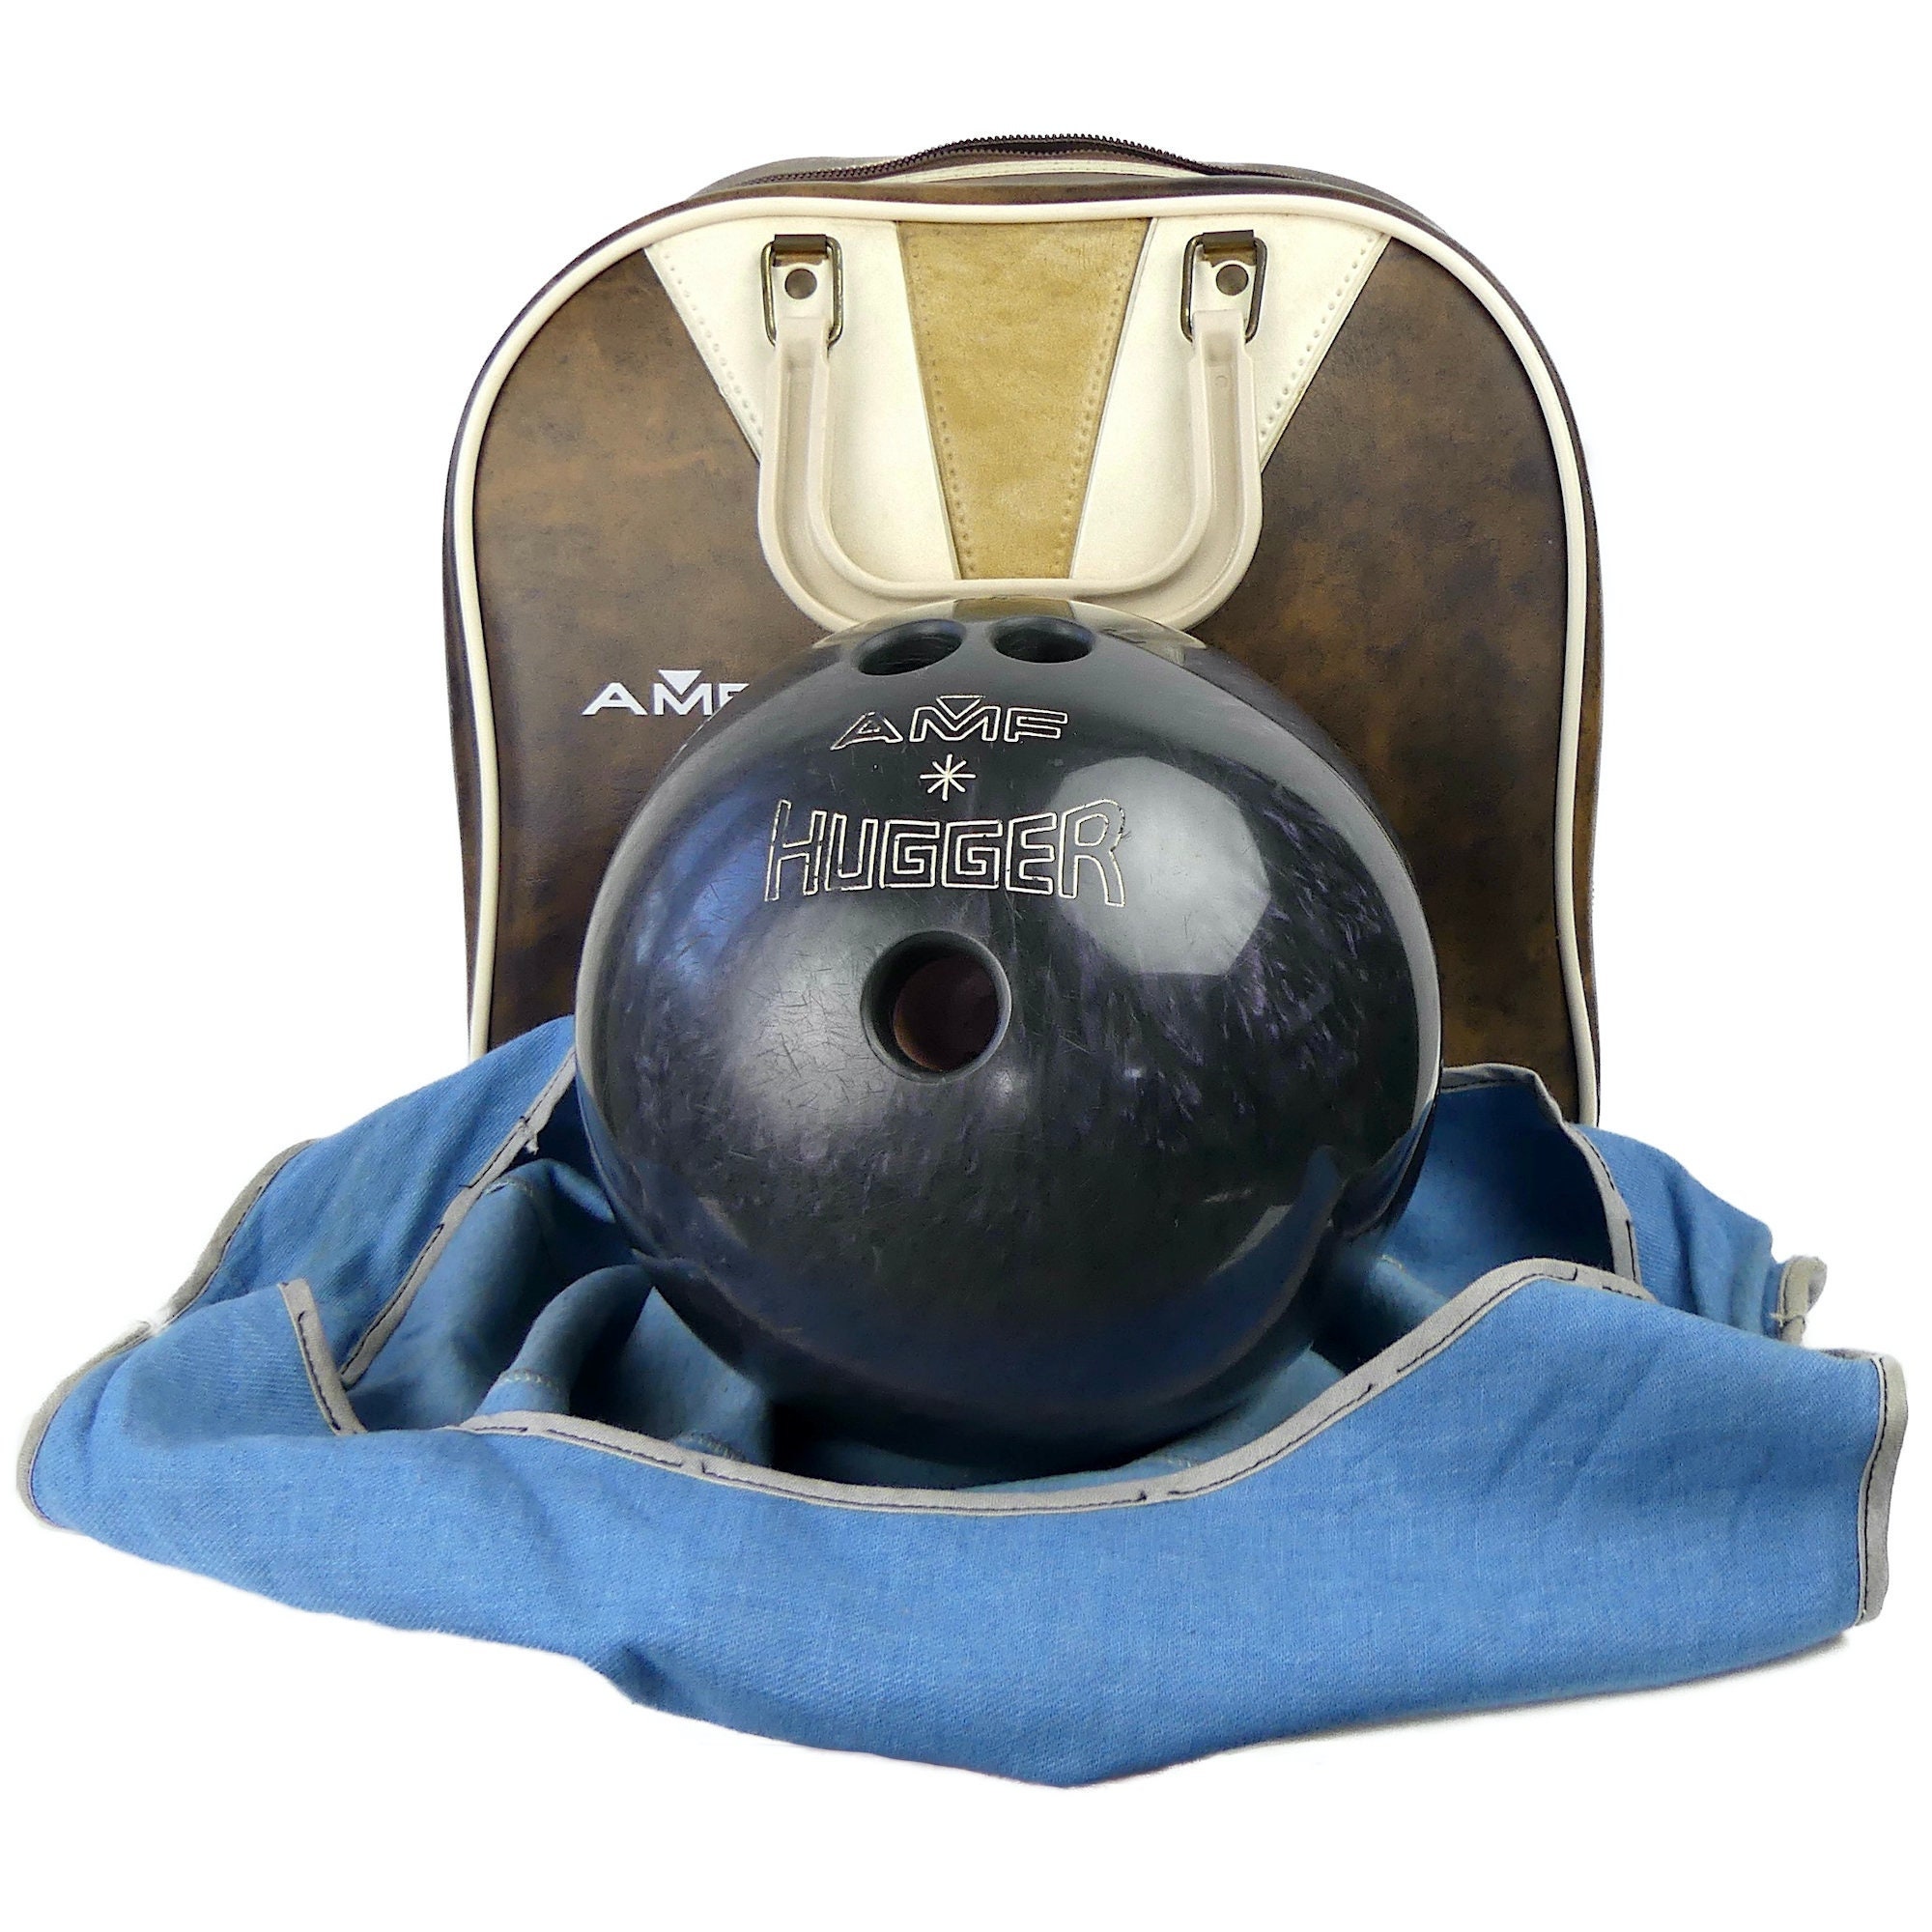 Bowling Ball AMF Voit and Vintage Leather Bag - sporting goods - by owner -  sale - craigslist